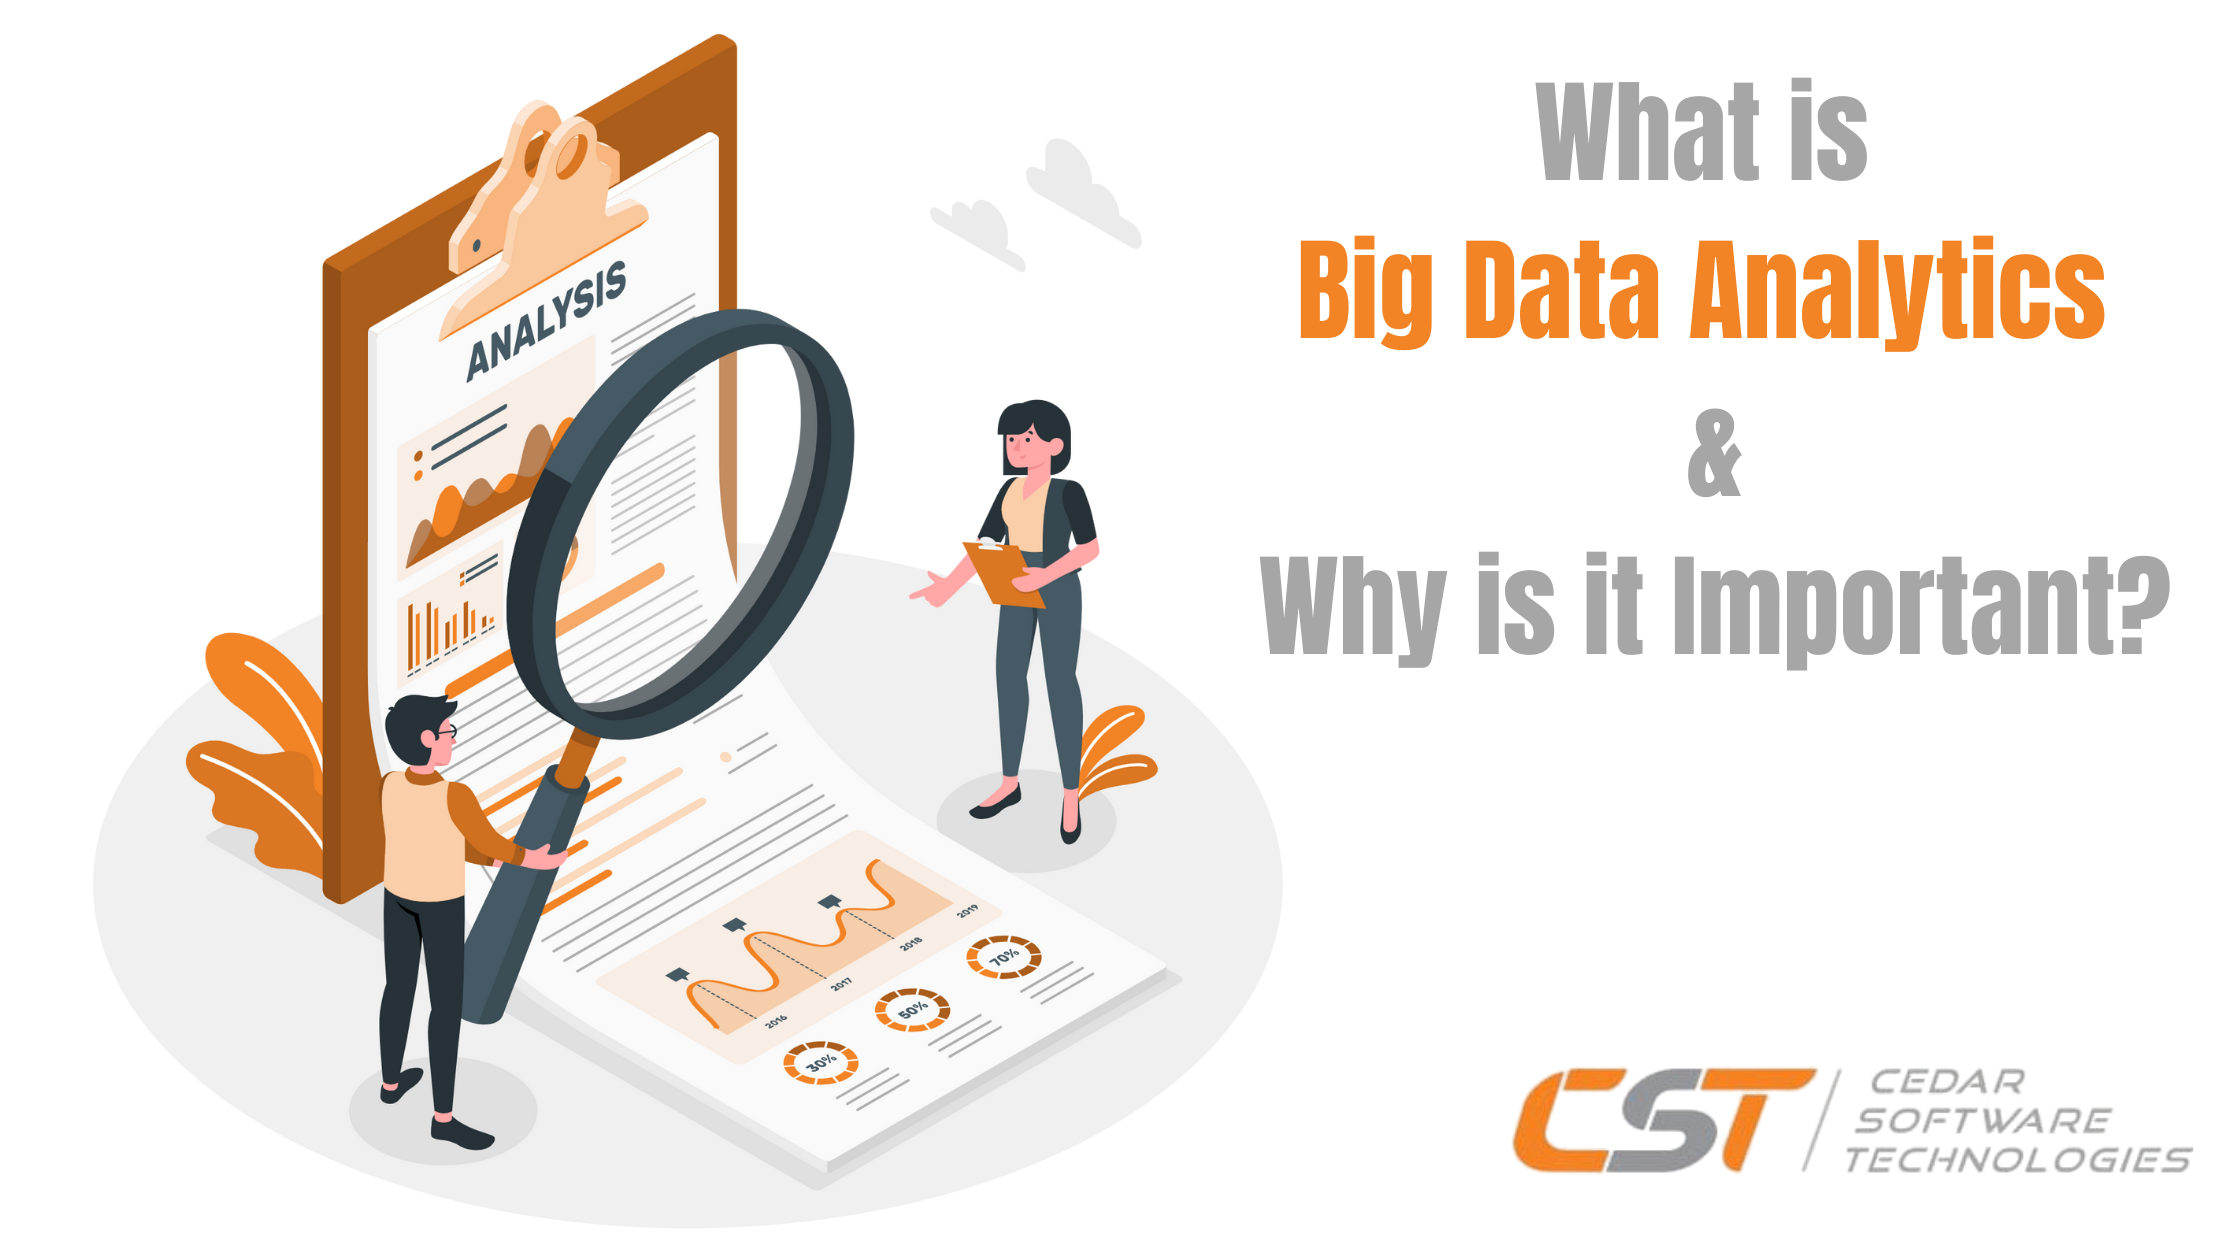 What is Big Data Analytics and why is it Important?